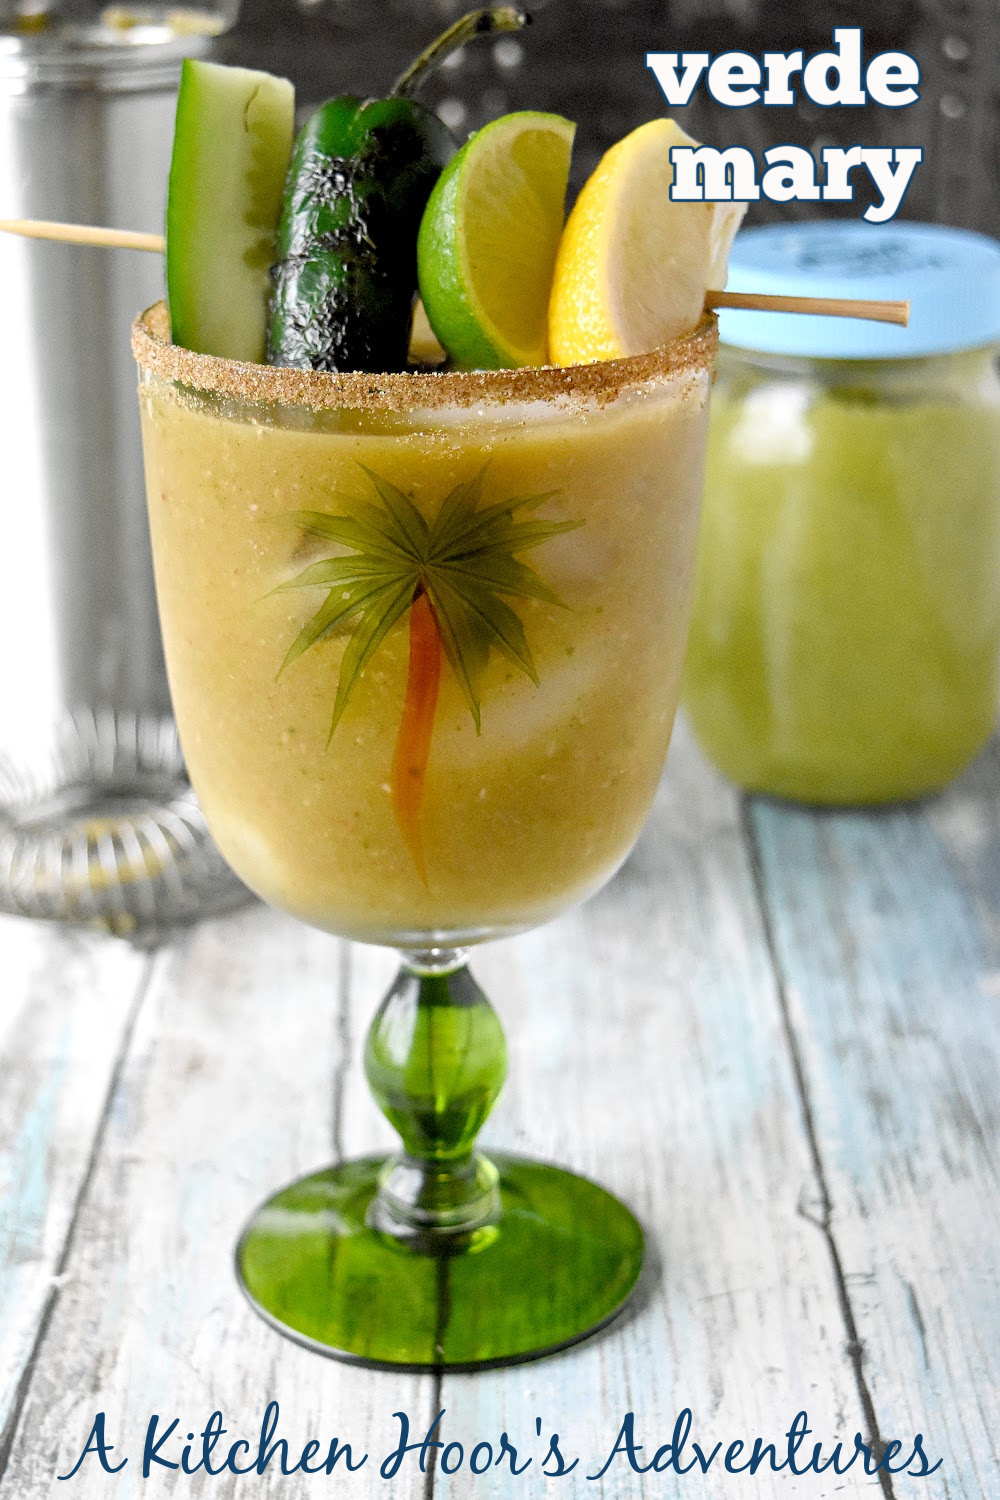 A Verde Mary is a delicious twist on a Bloody Mary! The base is made with tomatillos, jalapenos, green chiles, celery just to name a few green ingredients. #BrunchWeek #bloodyMary #VerdeMary #cocktail
